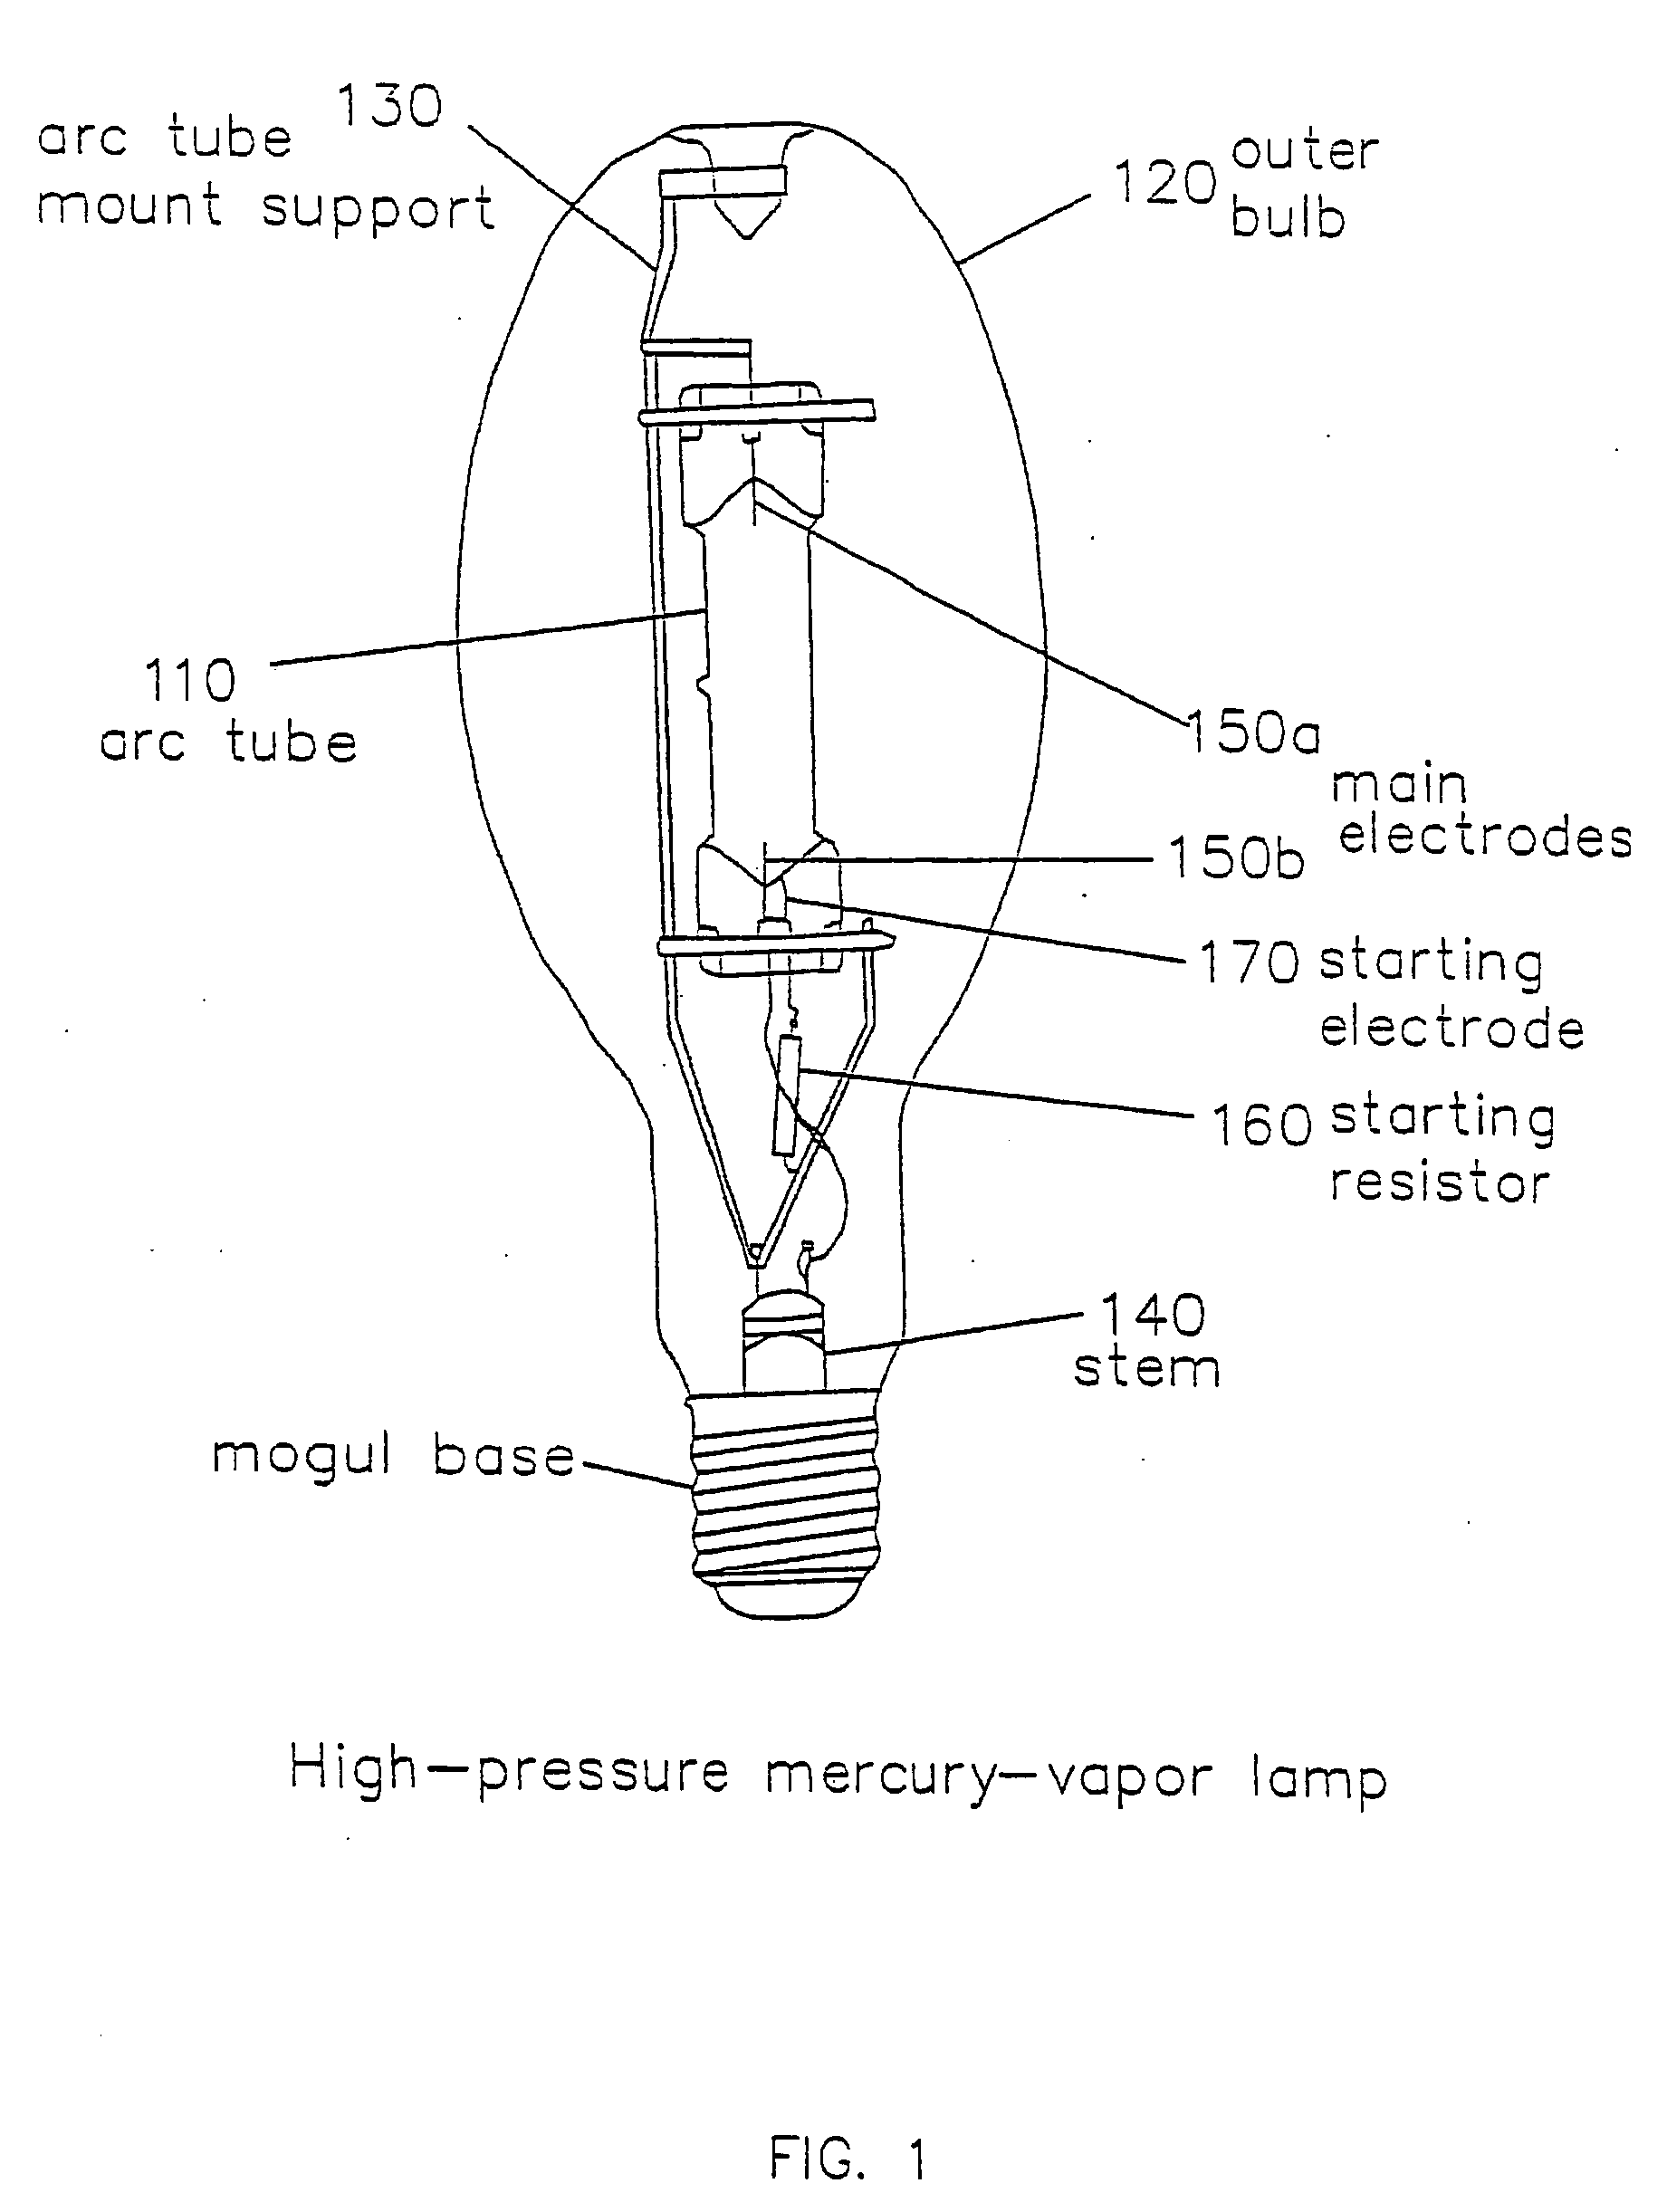 Lamp monitoring and control system and method